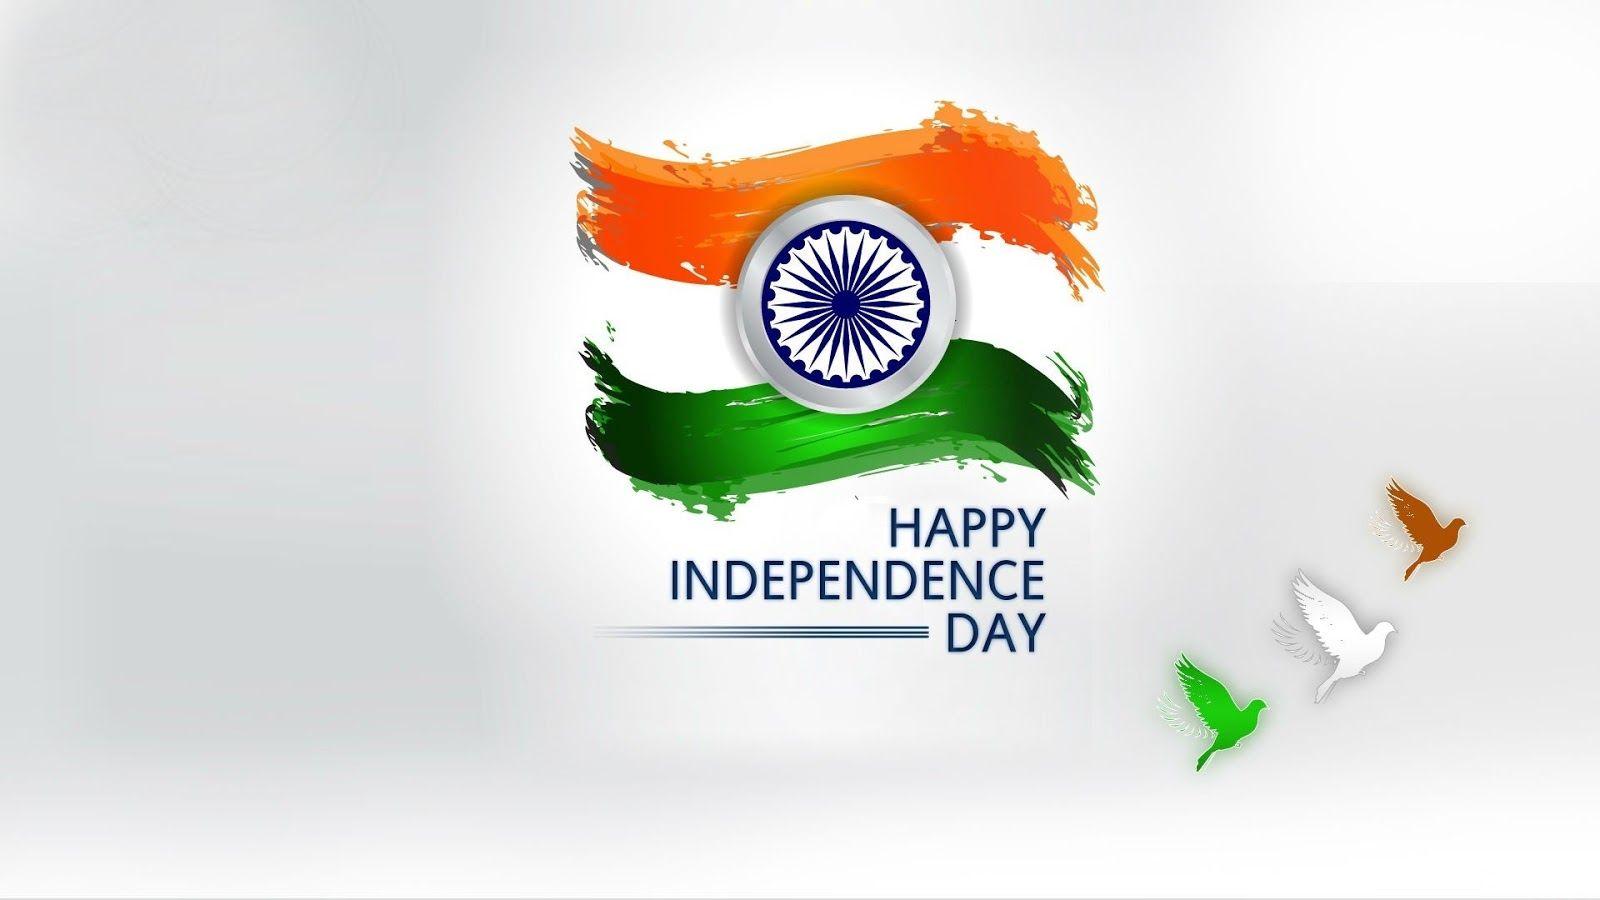 Happy Independence Day HD Wallpaper, Image, Photo. WALLPAPERS. Happy independence day wishes, Happy independence day image, Happy independence day wallpaper